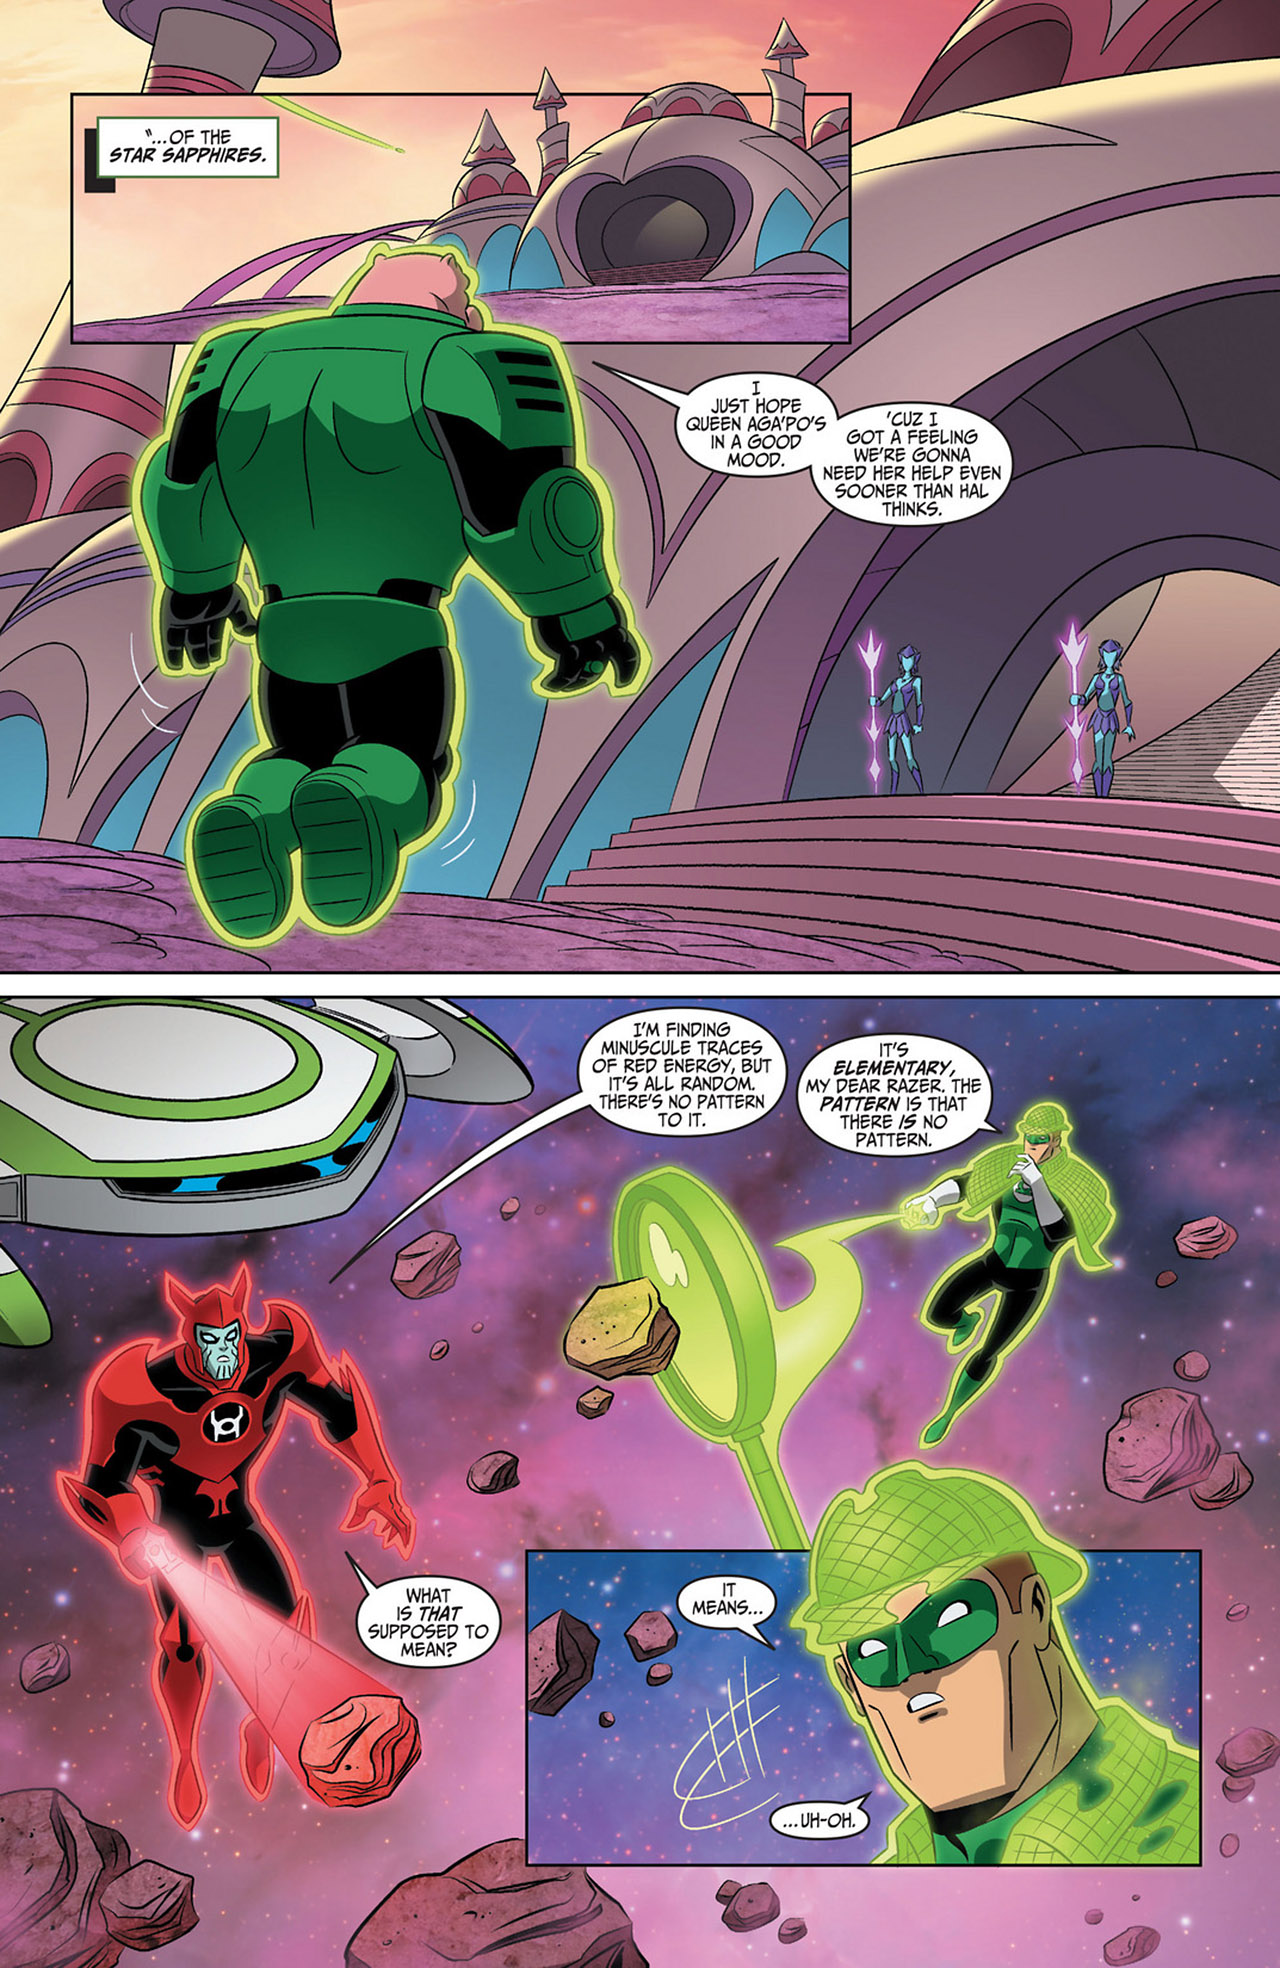 Green Lantern The Animated Series Issue 12 | Read Green Lantern The Animated  Series Issue 12 comic online in high quality. Read Full Comic online for  free - Read comics online in